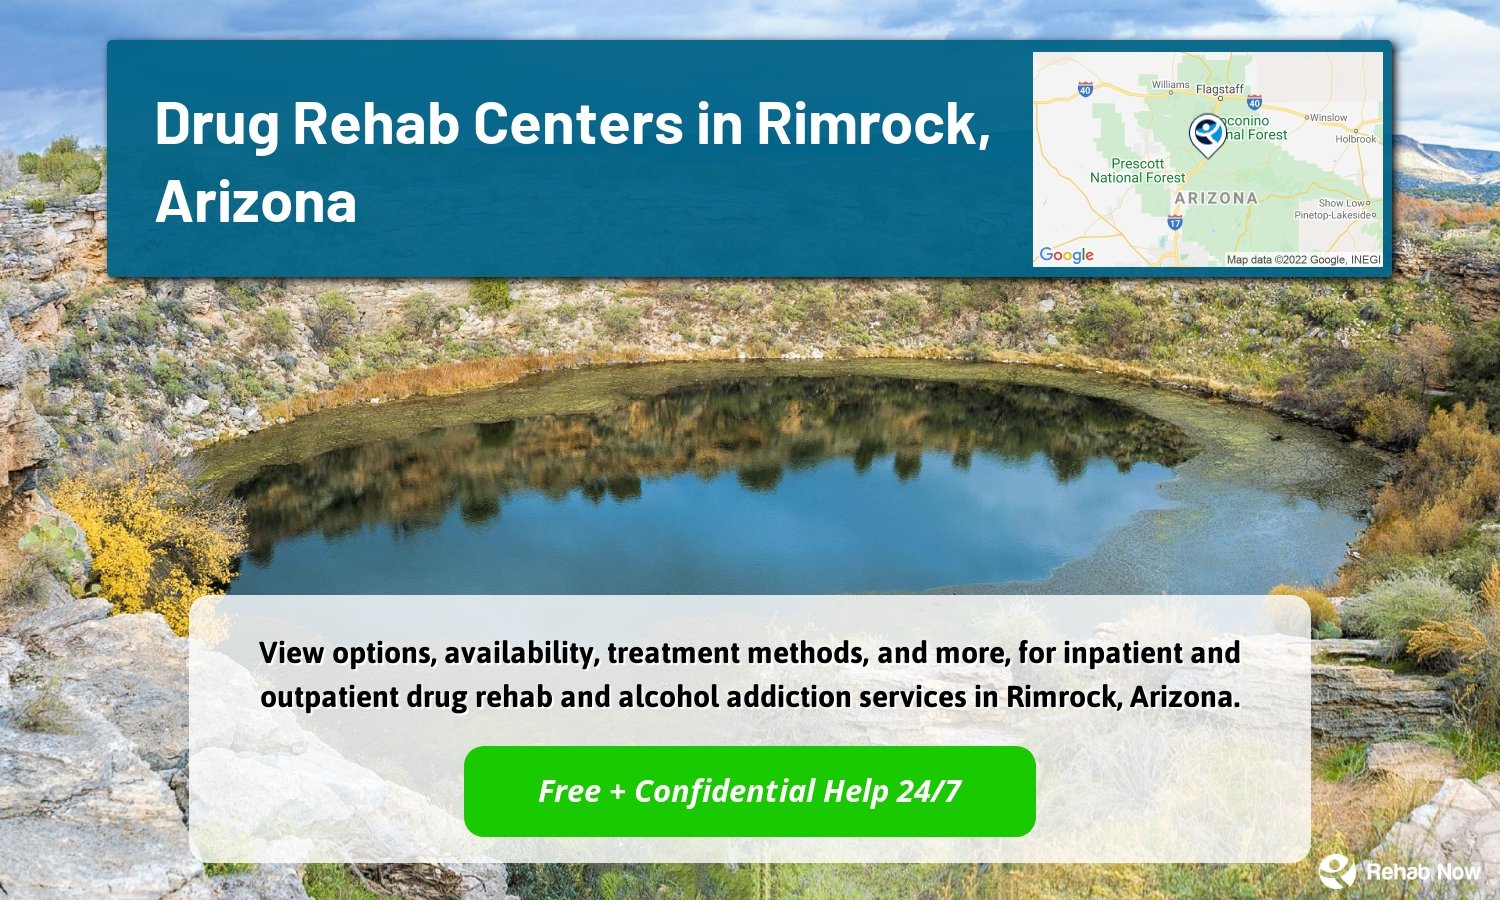 View options, availability, treatment methods, and more, for inpatient and outpatient drug rehab and alcohol addiction services in Rimrock, Arizona.